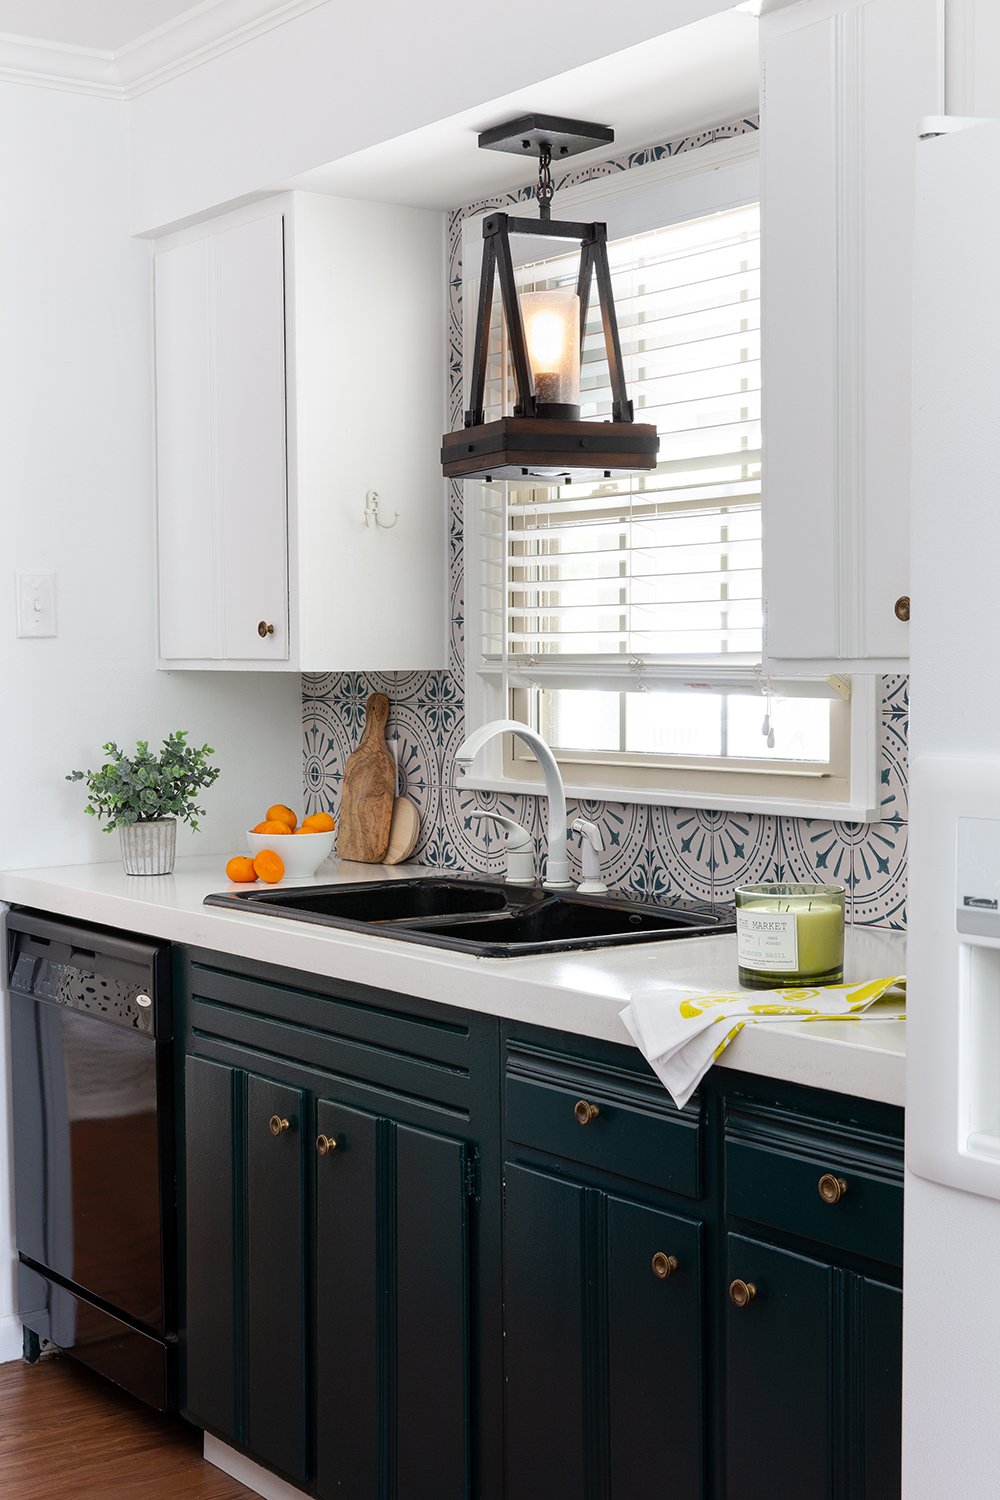 Cool backsplash stickers in this before-and-after kitchen makeover